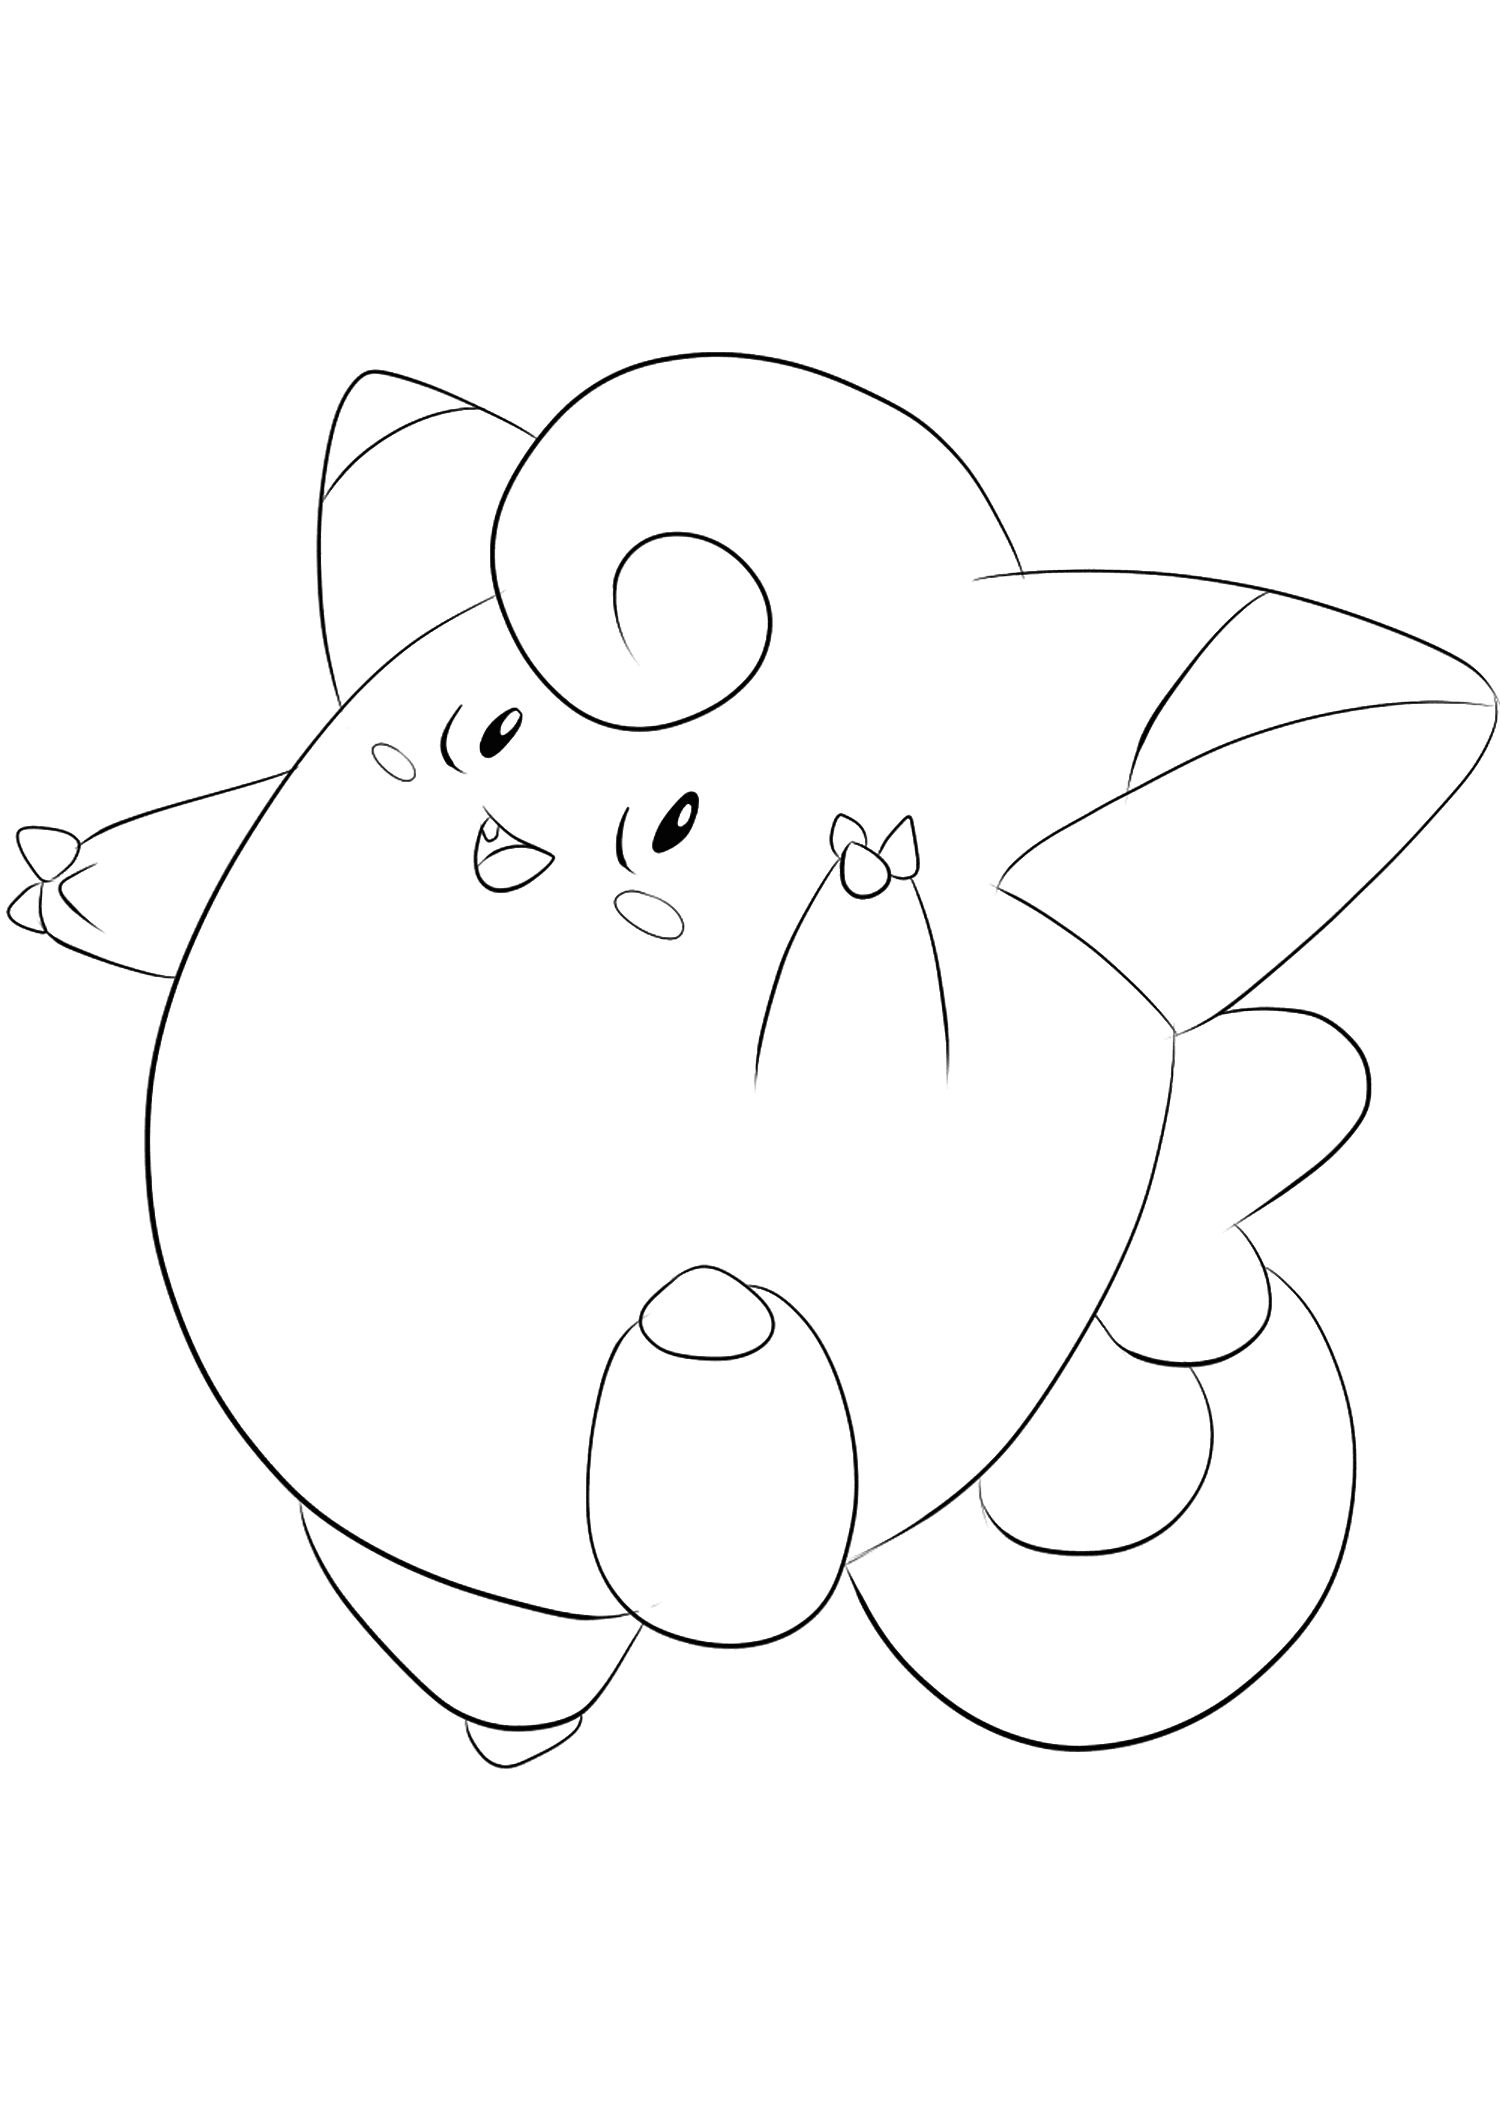 Clefairy (No.35). Clefairy Coloring page, Generation I Pokemon of type FairyOriginal image credit: Pokemon linearts by Lilly Gerbil'font-size:smaller;color:gray'>Permission: All rights reserved © Pokemon company and Ken Sugimori.